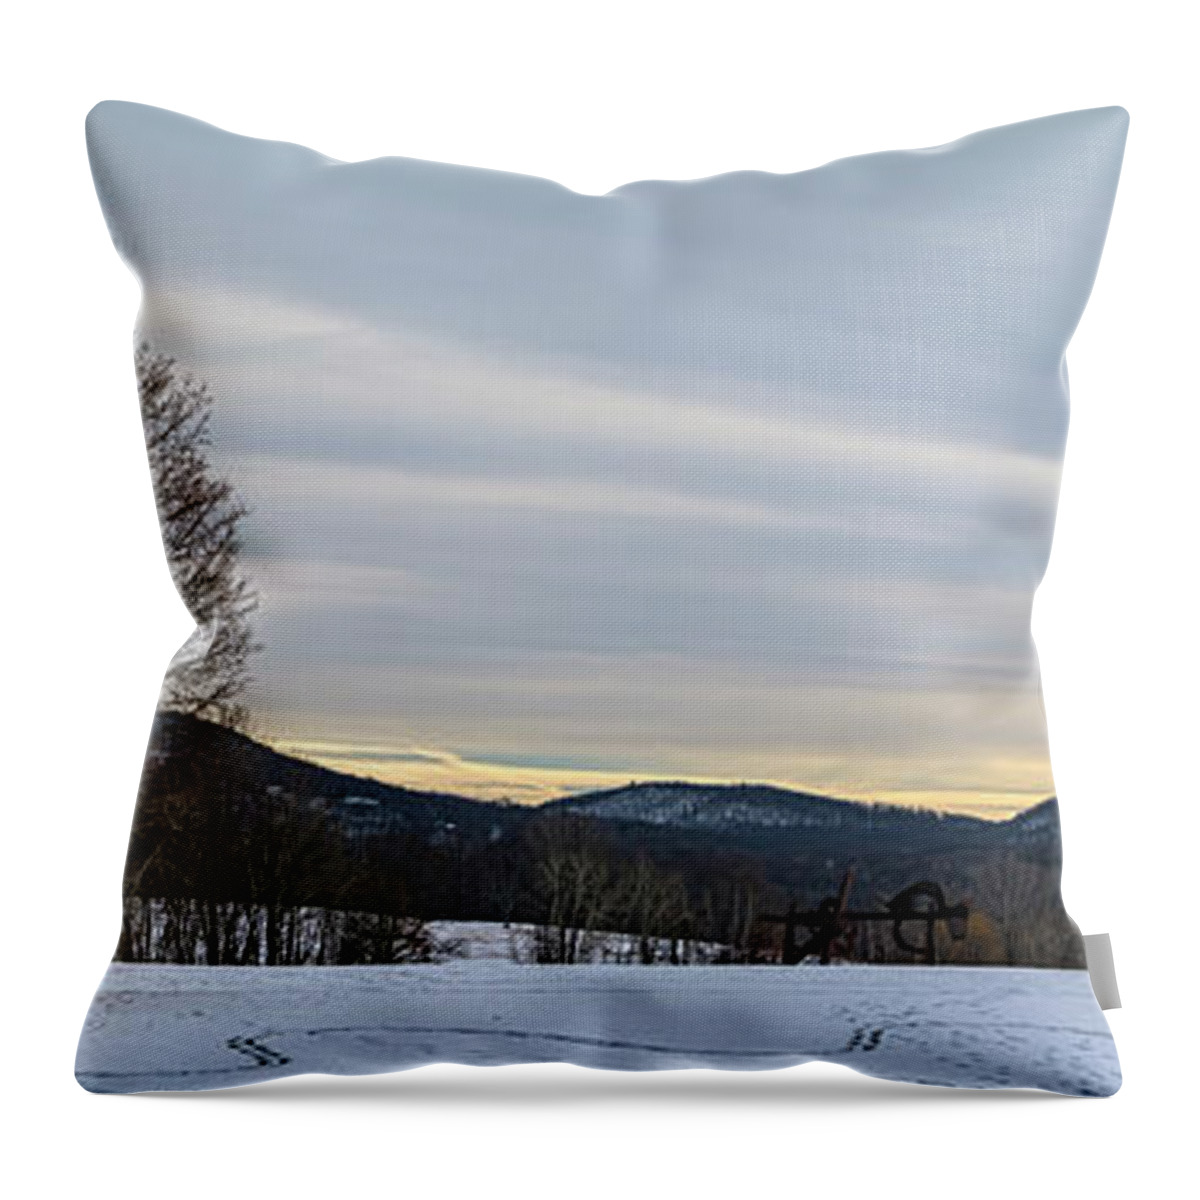 Sculpture Throw Pillow featuring the photograph Winter Panorama Of Storm King Art Center by Angelo Marcialis